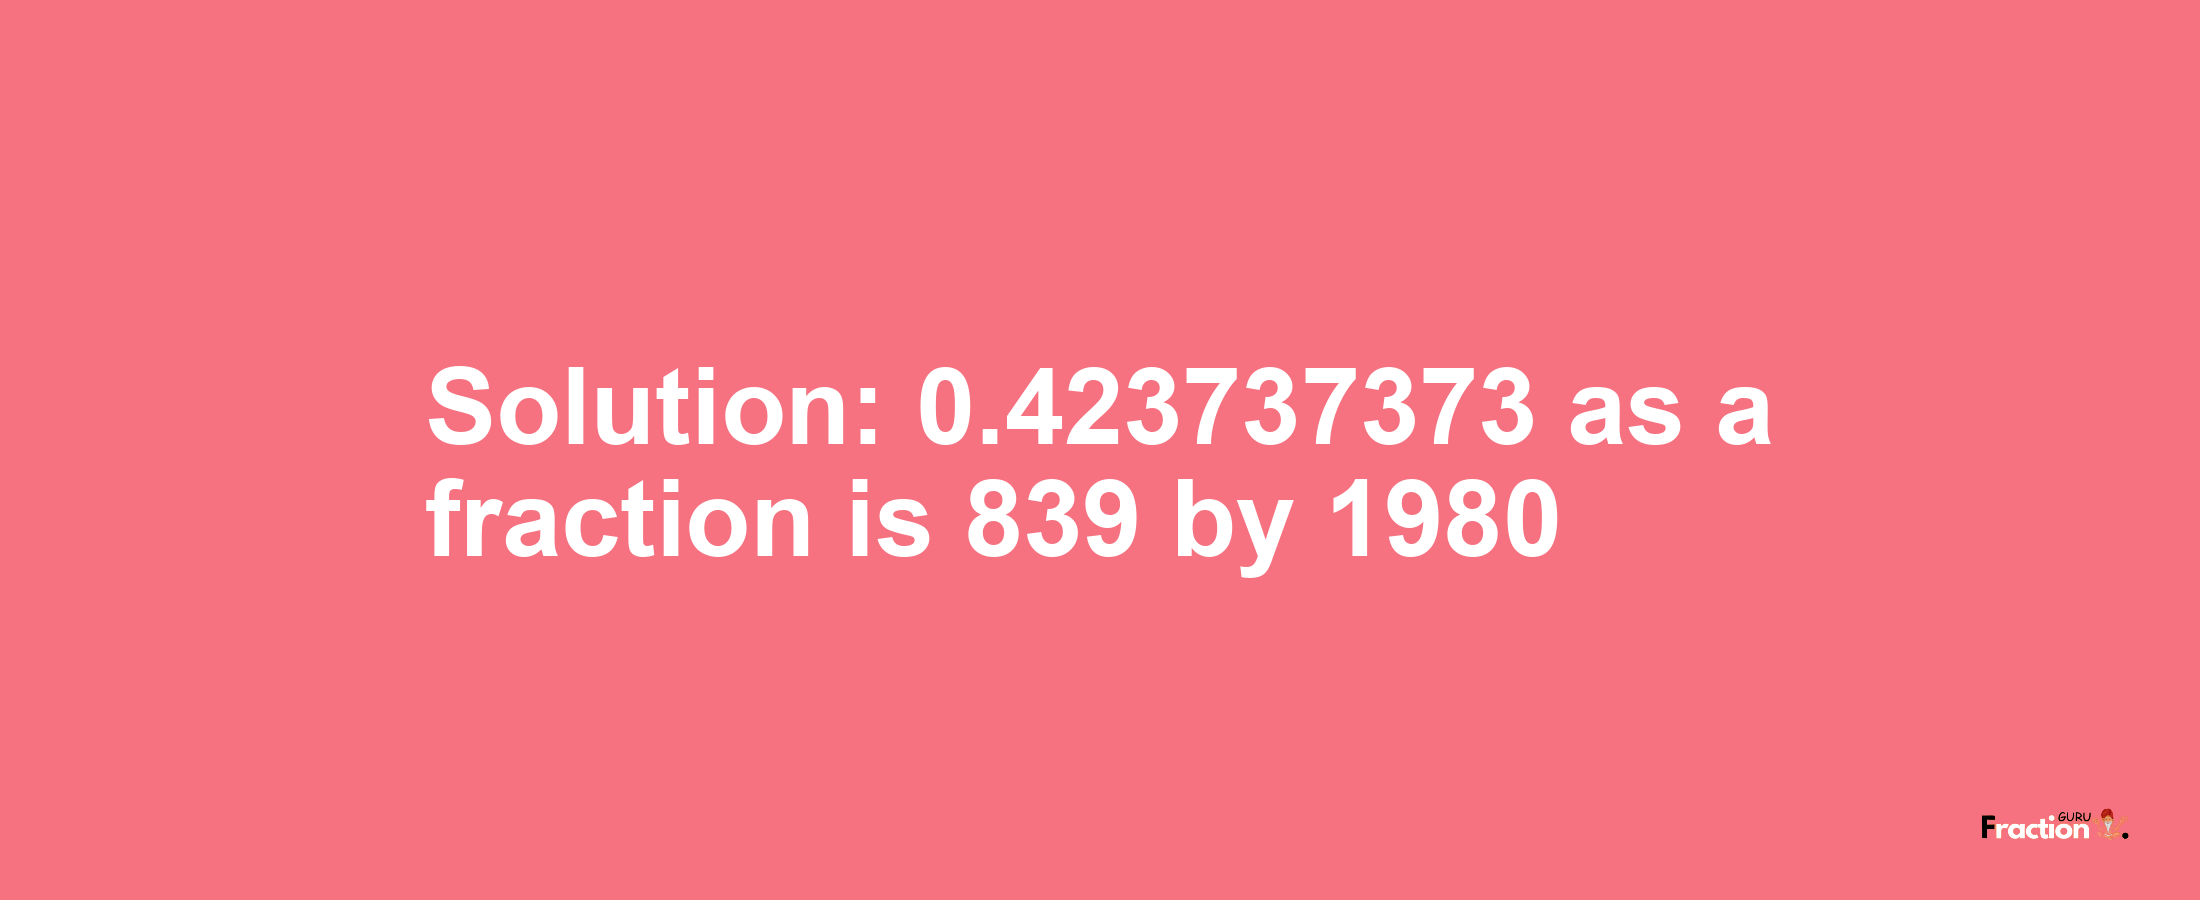 Solution:0.423737373 as a fraction is 839/1980